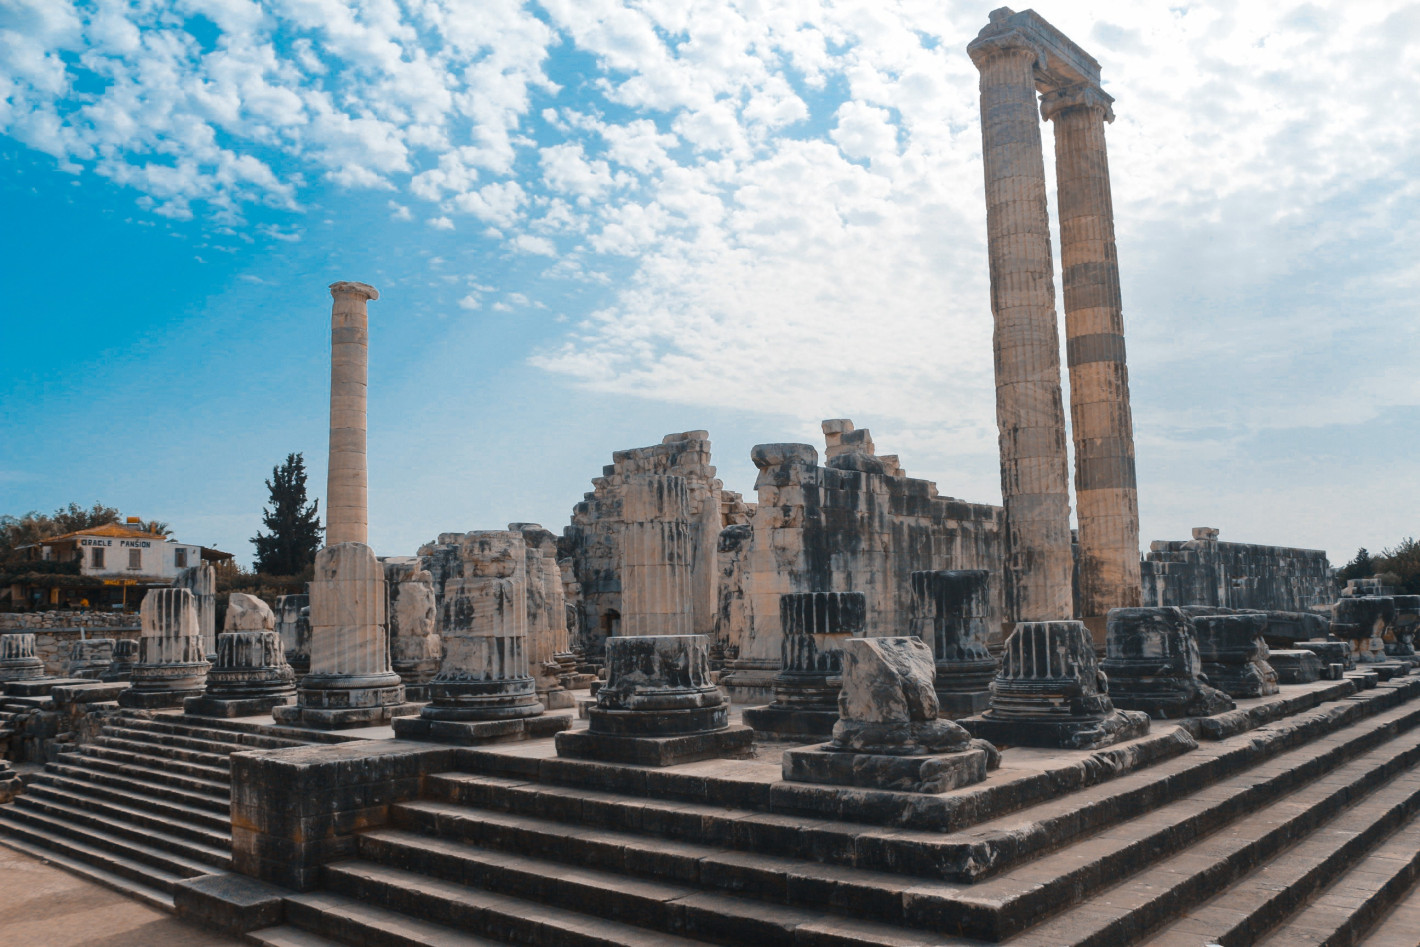 The Ionian Cities and Temples Tour